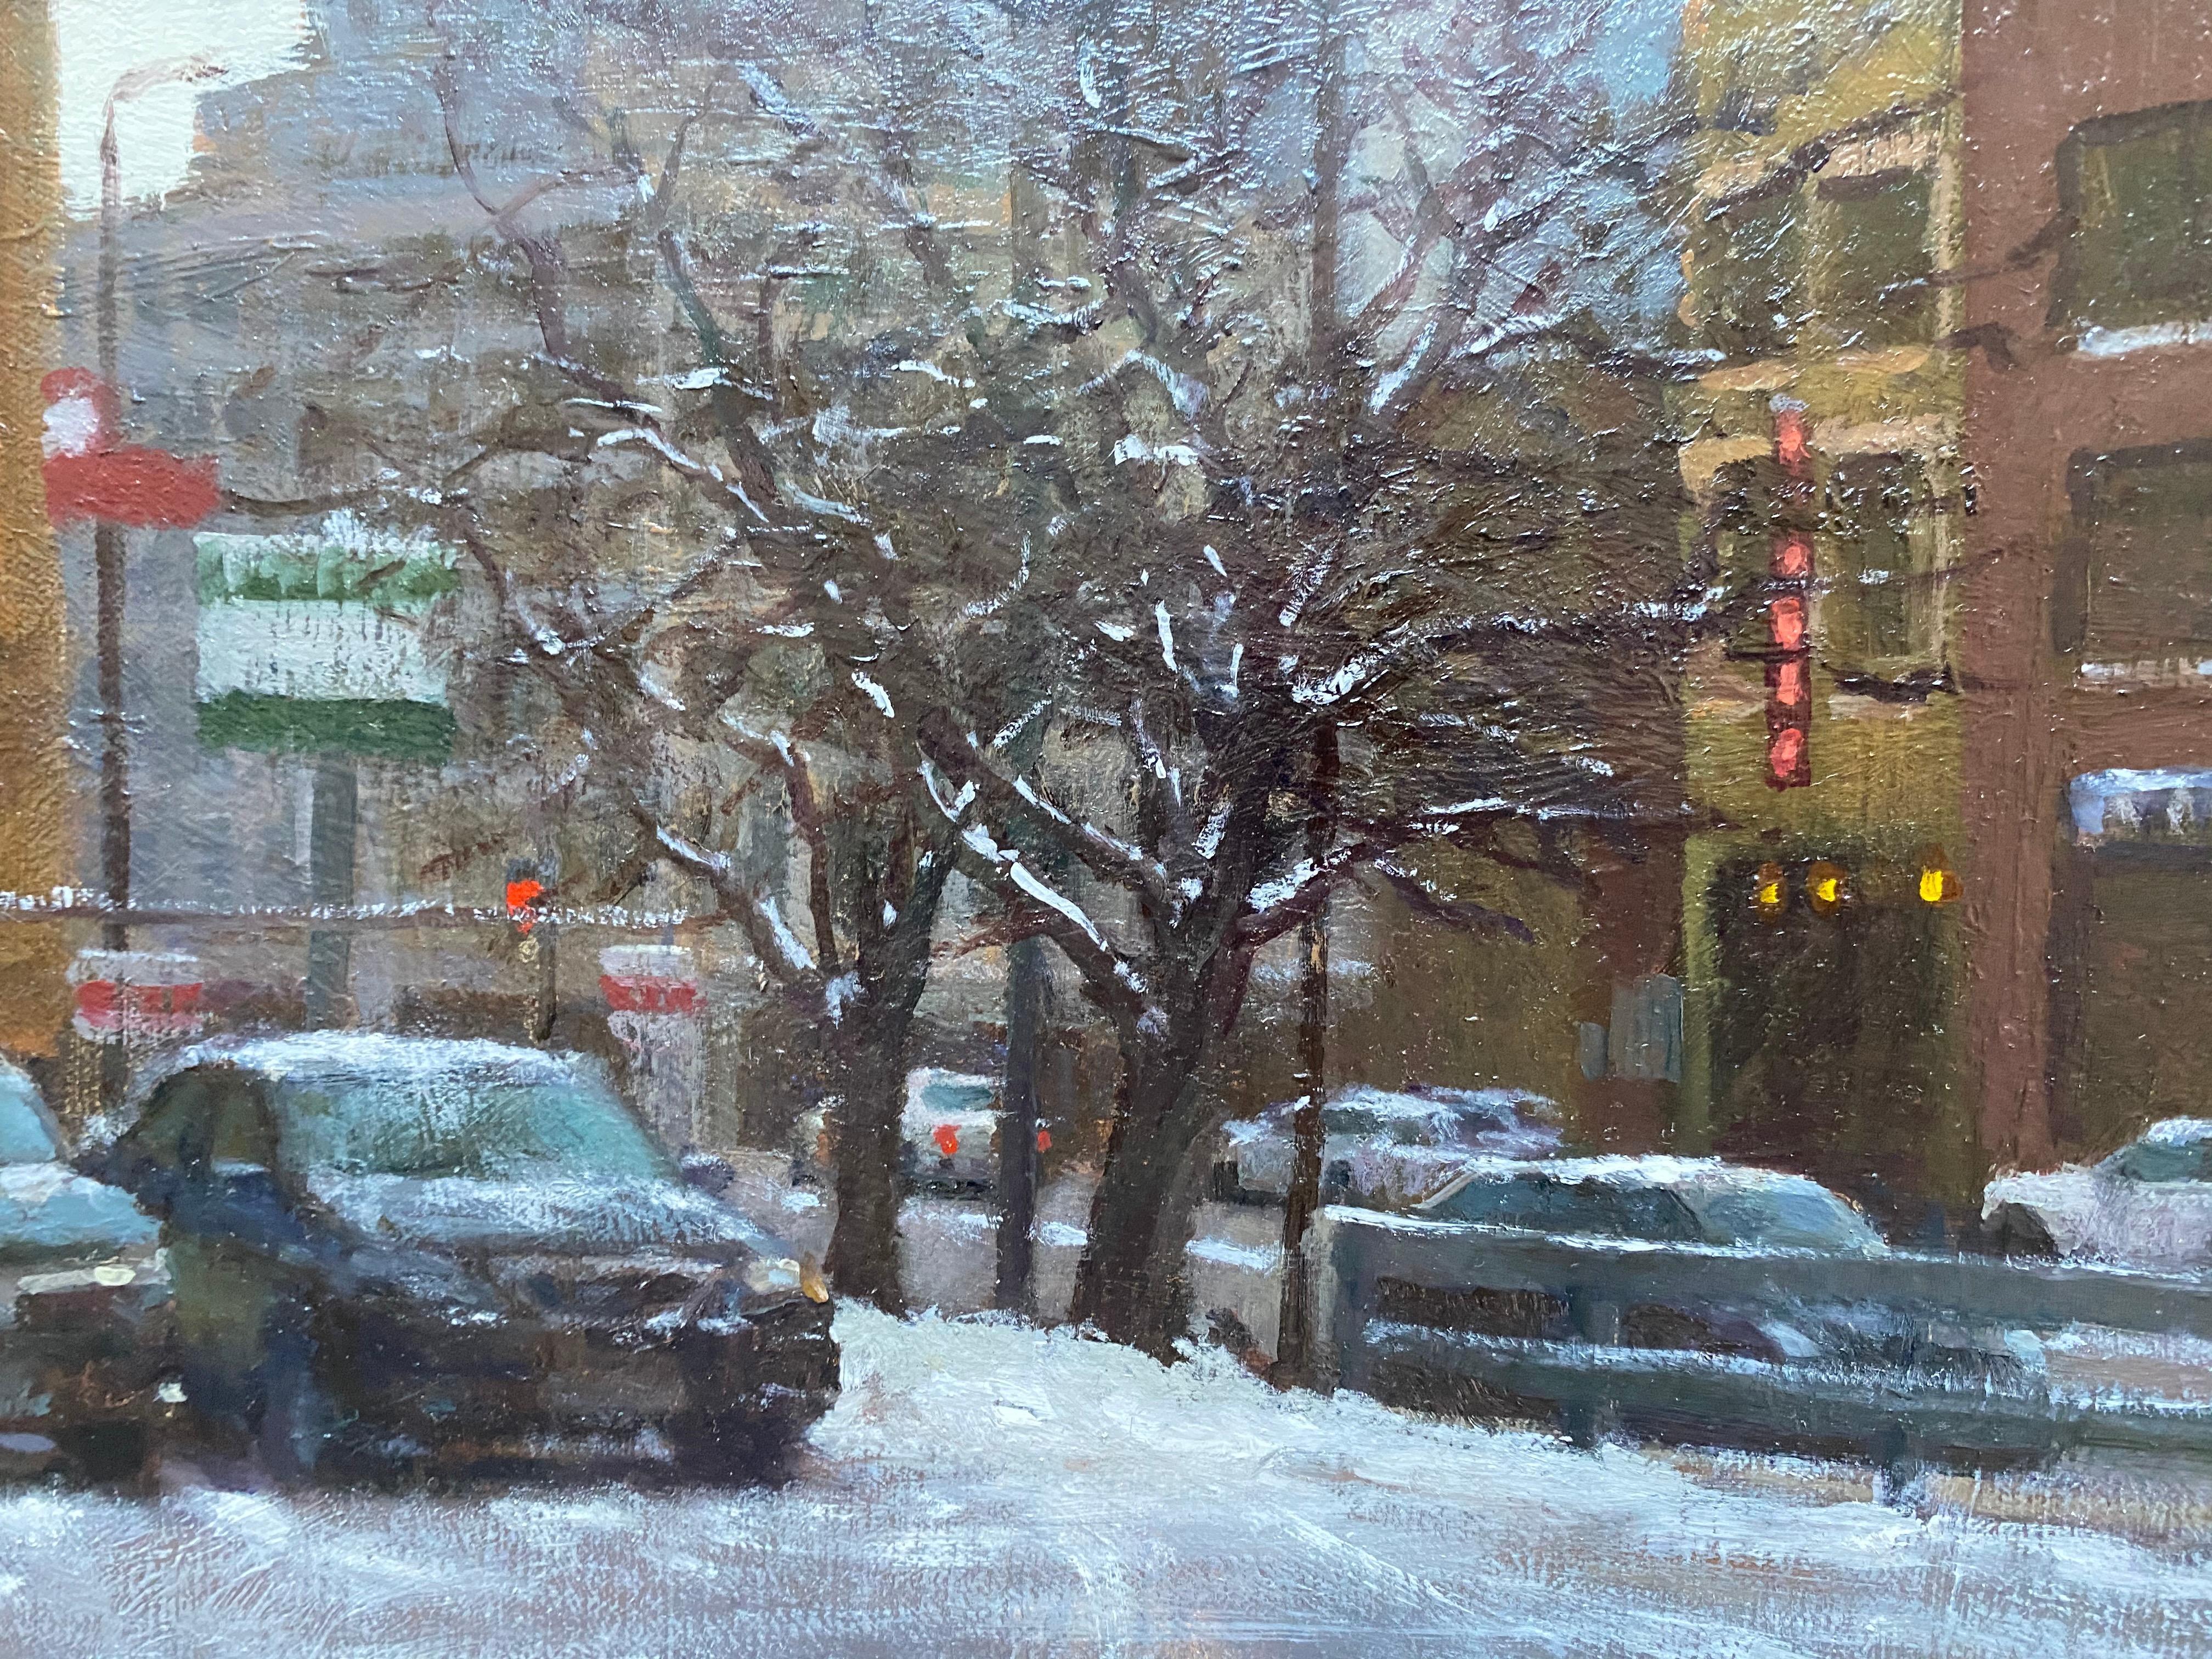 Oil painting of cars in front of a billboard, painted en plein air, in Minneapolis, MN during the winter.


Artist Bio
Carl Bretzke is a representational painter who specializes in urban scenes and plein-air landscapes. Carl's work has been